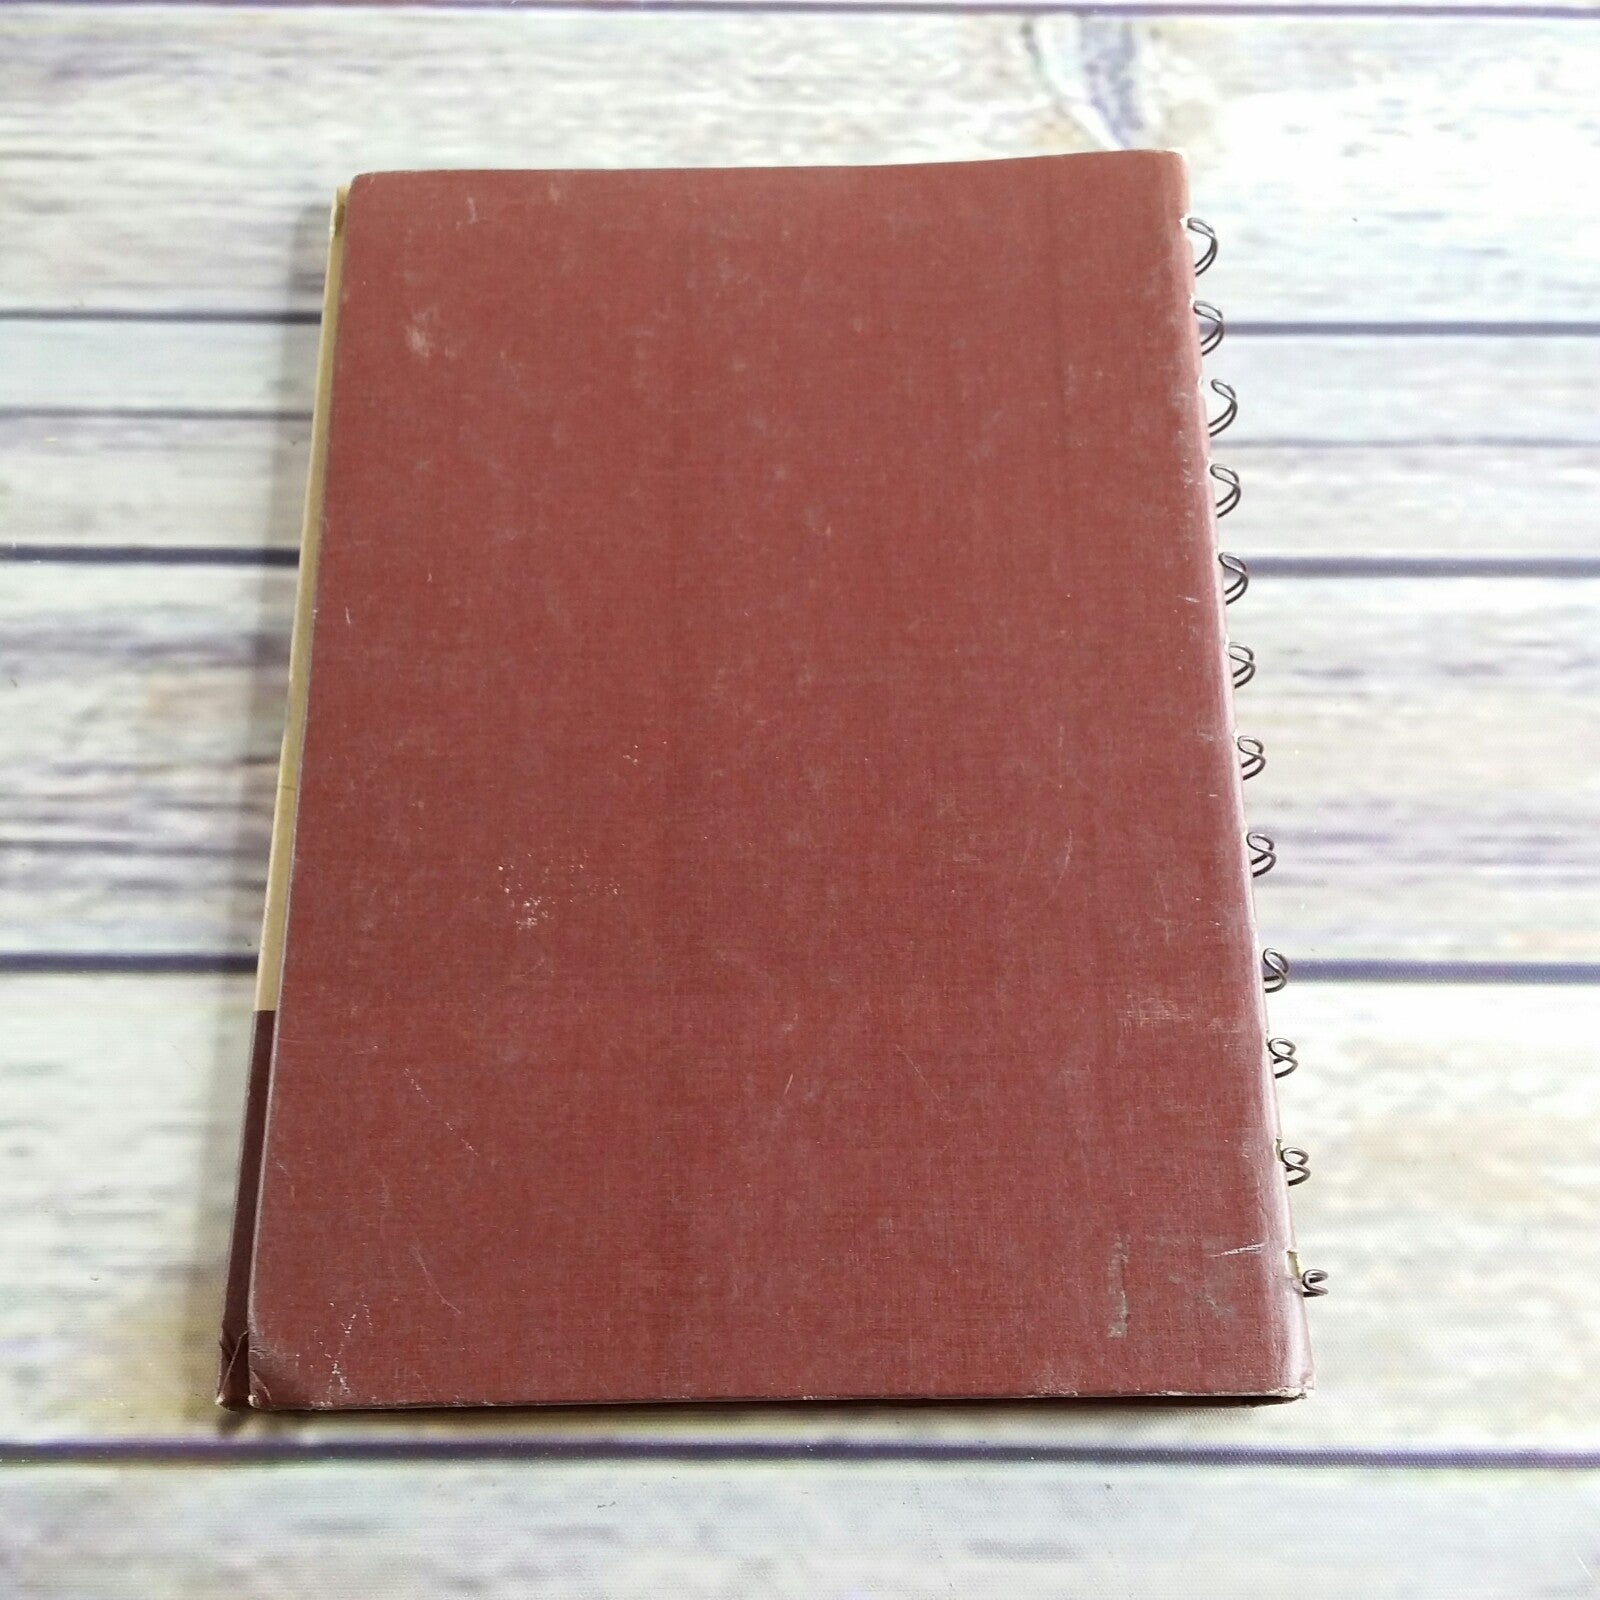 Vintage Cookbook Hersheys 1934 1971 Hardcover Eleventh Printing Revised and Expanded Cocoa Chocolate Promo Recipes - At Grandma's Table